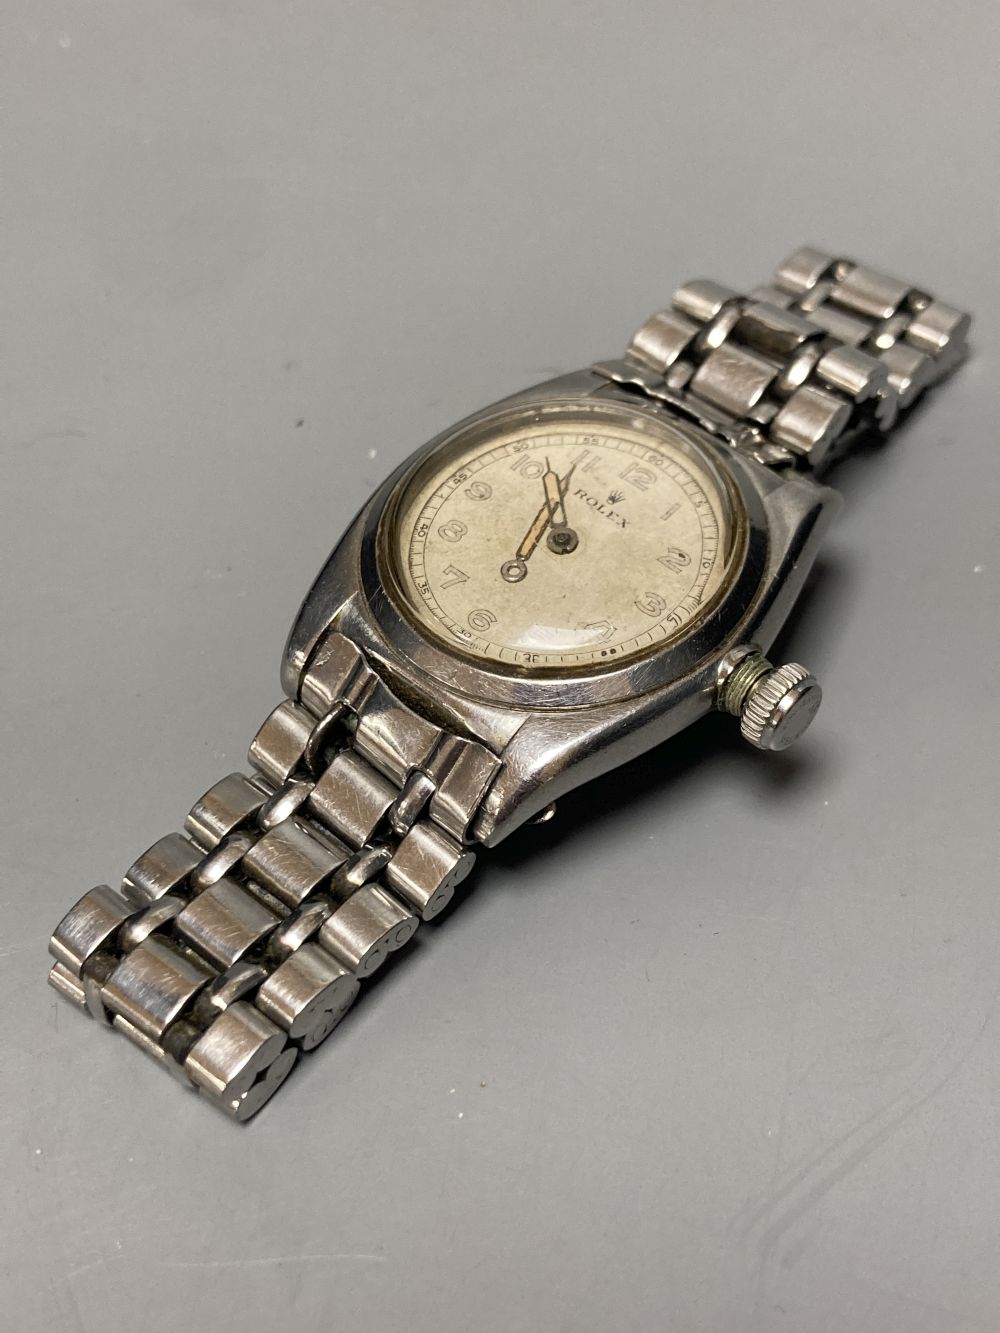 A gentlemans 1930s/1940s? stainless steel mid size Rolex manual wind wrist watch, with signed Ultra Prima movement,